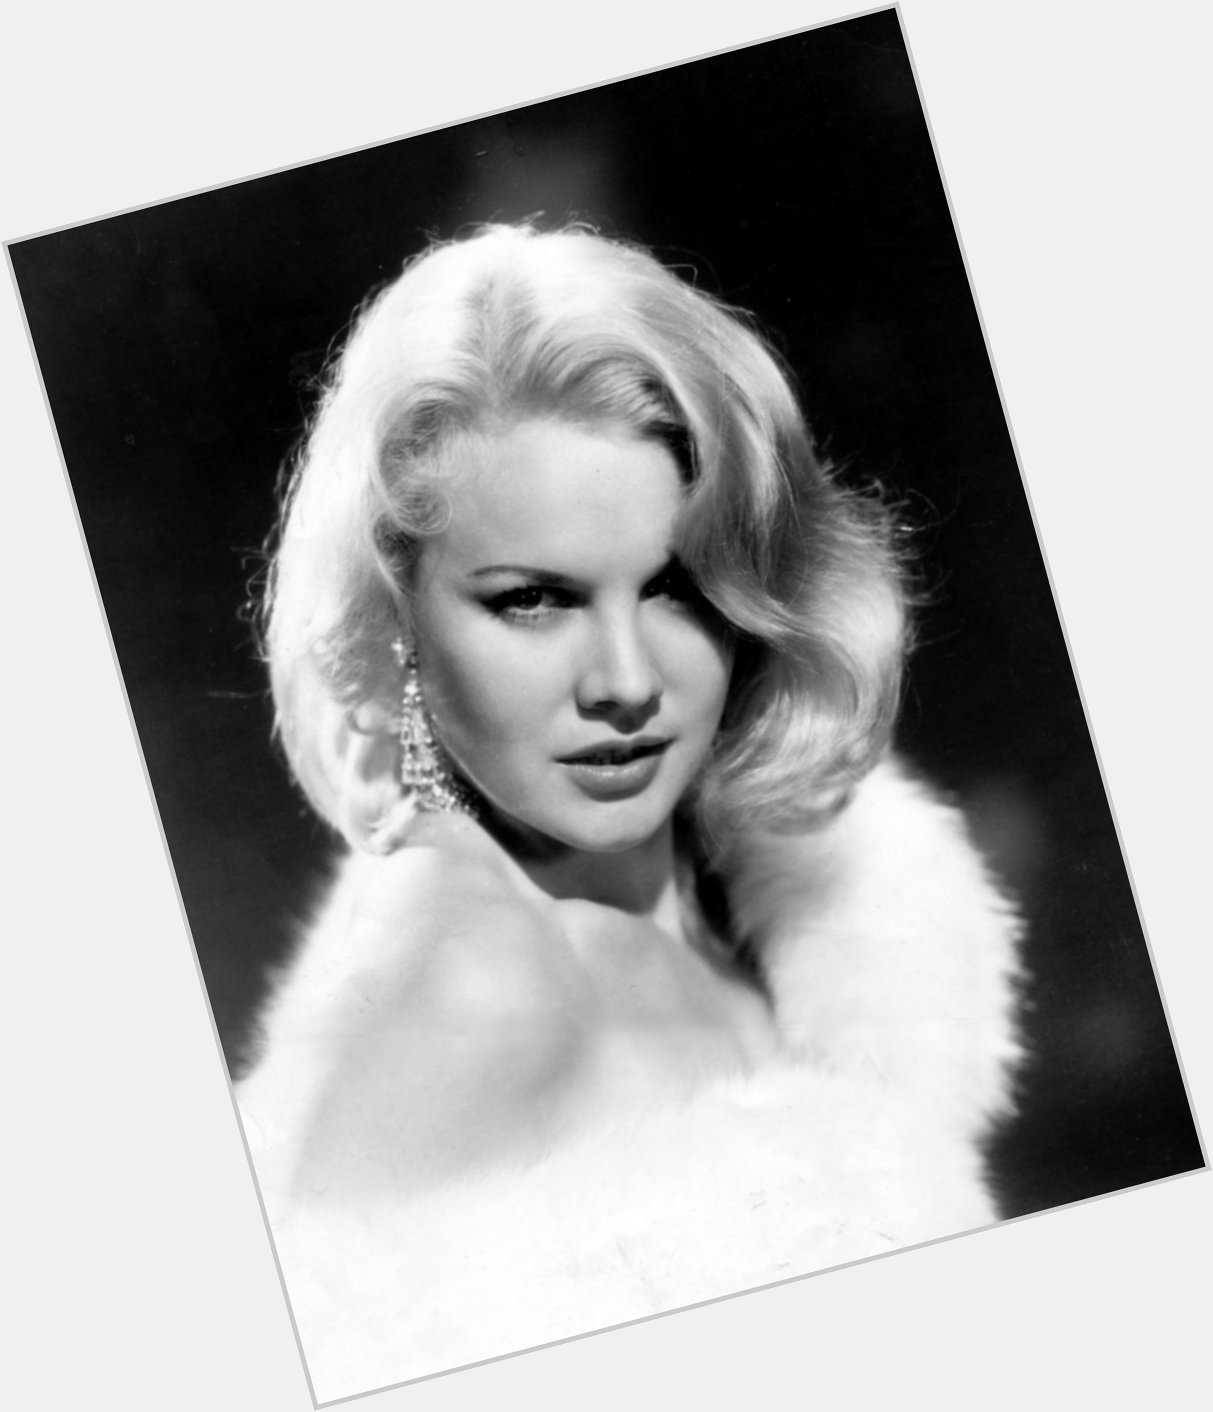 Happy birthday Carroll Baker, 86 today: Baby Doll, Giant, The Big Country, How the West Was Won, Something Wild 